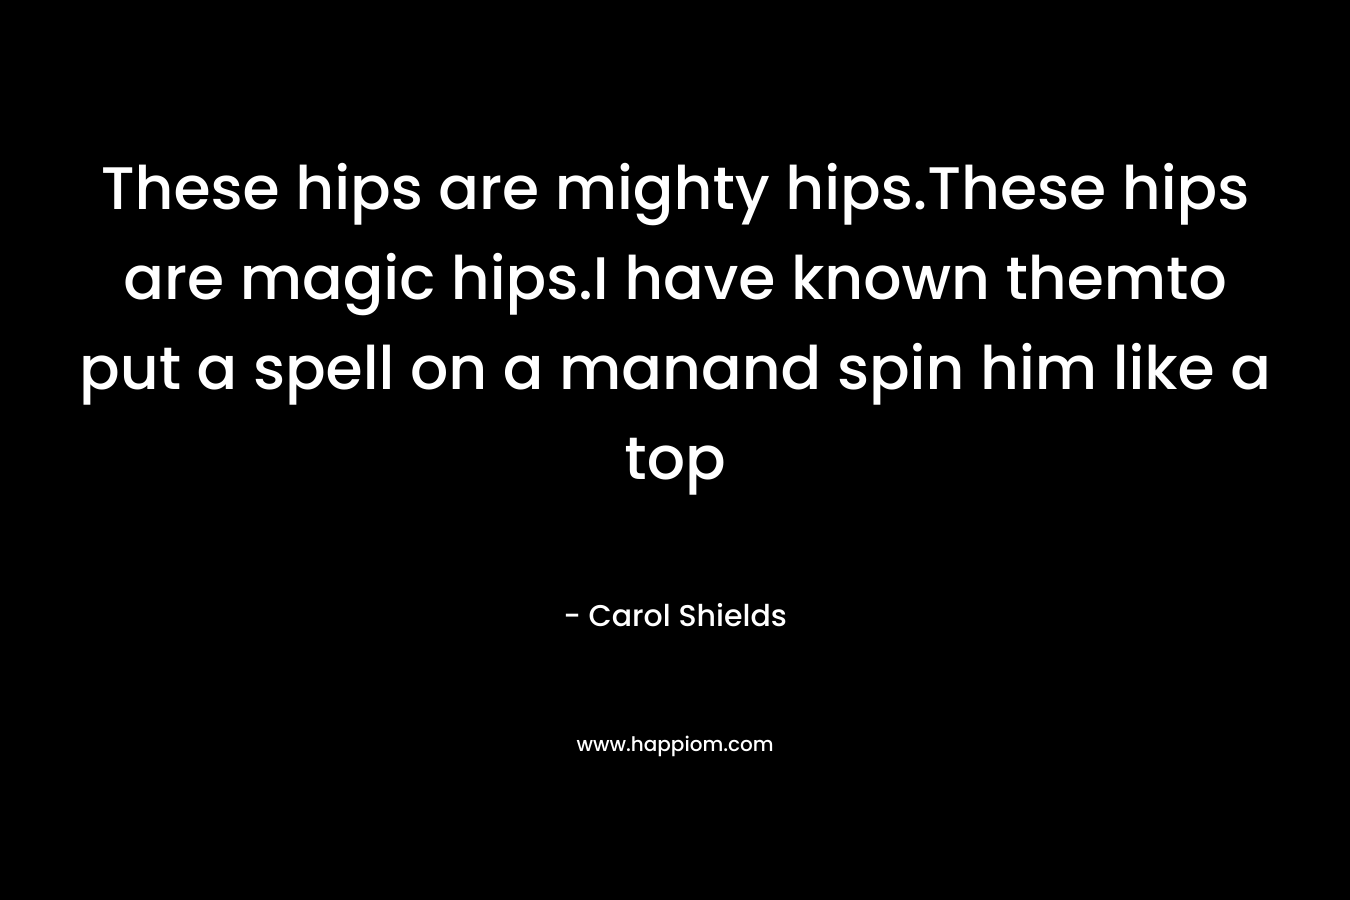 These hips are mighty hips.These hips are magic hips.I have known themto put a spell on a manand spin him like a top